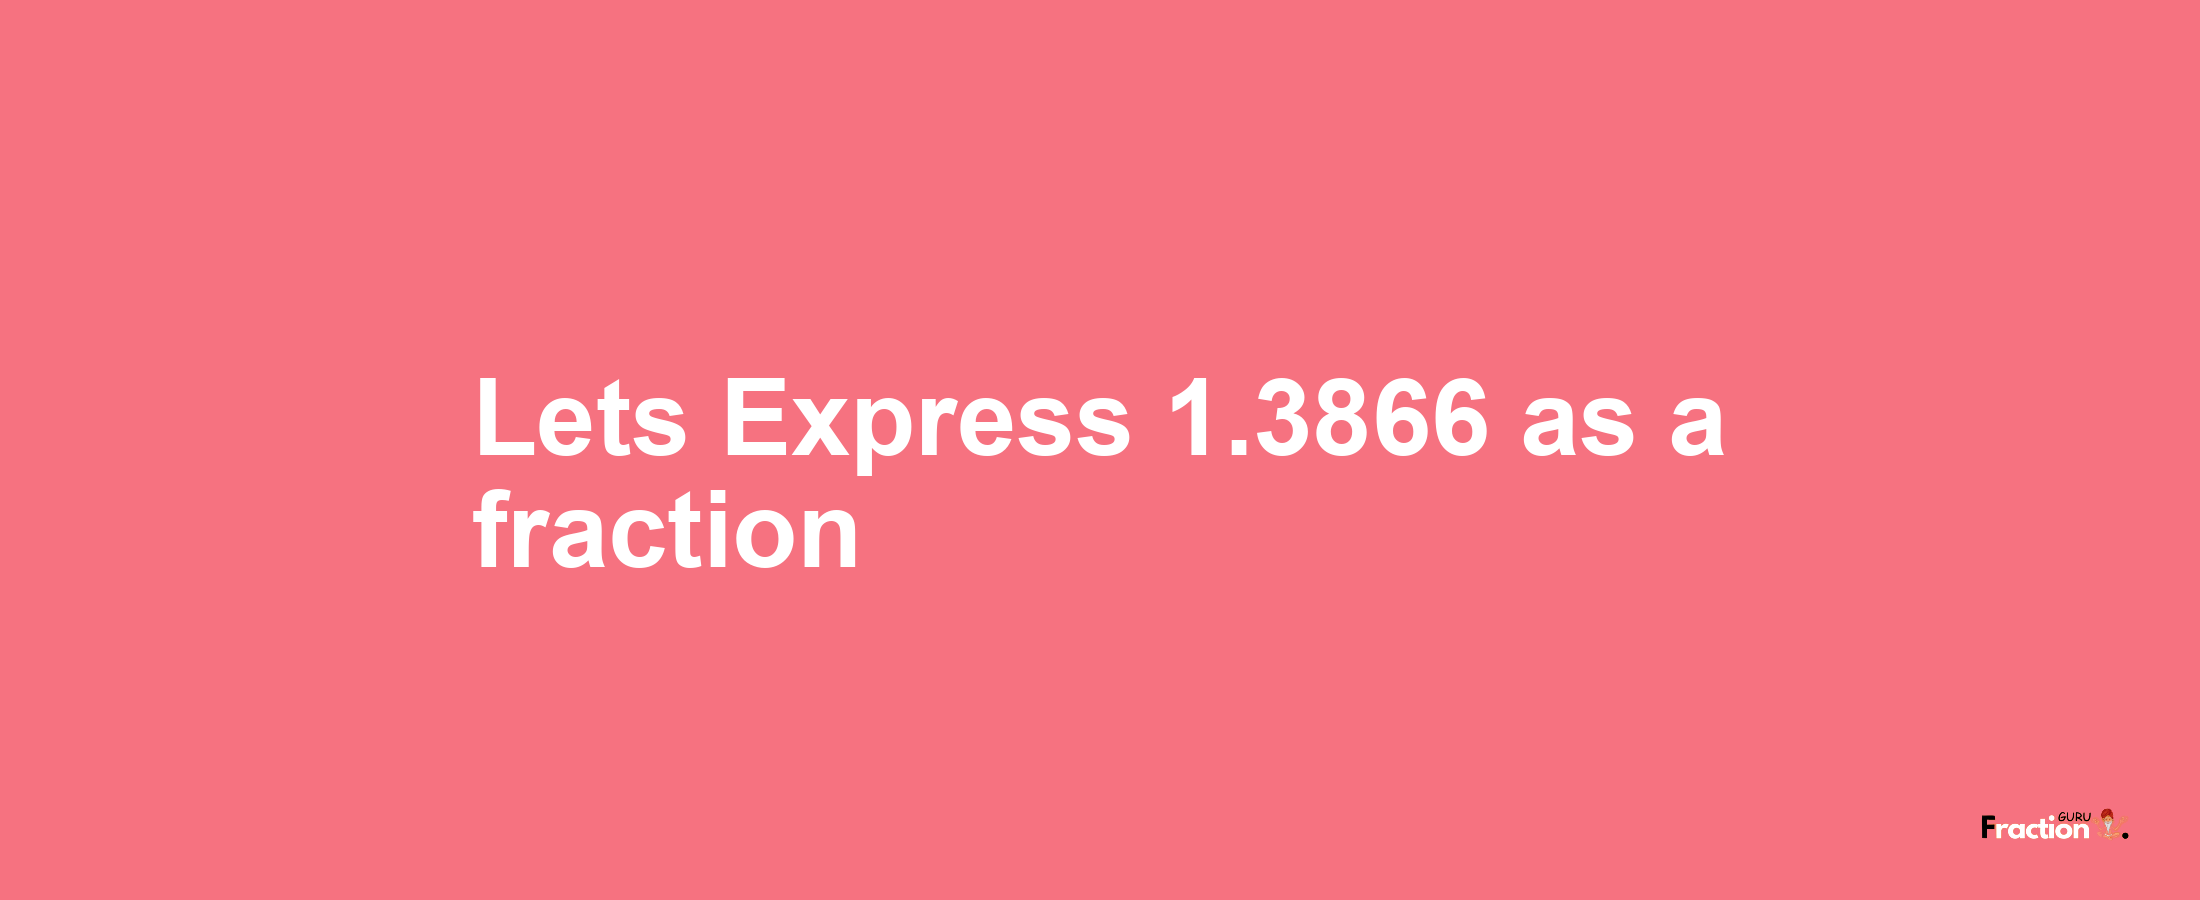 Lets Express 1.3866 as afraction